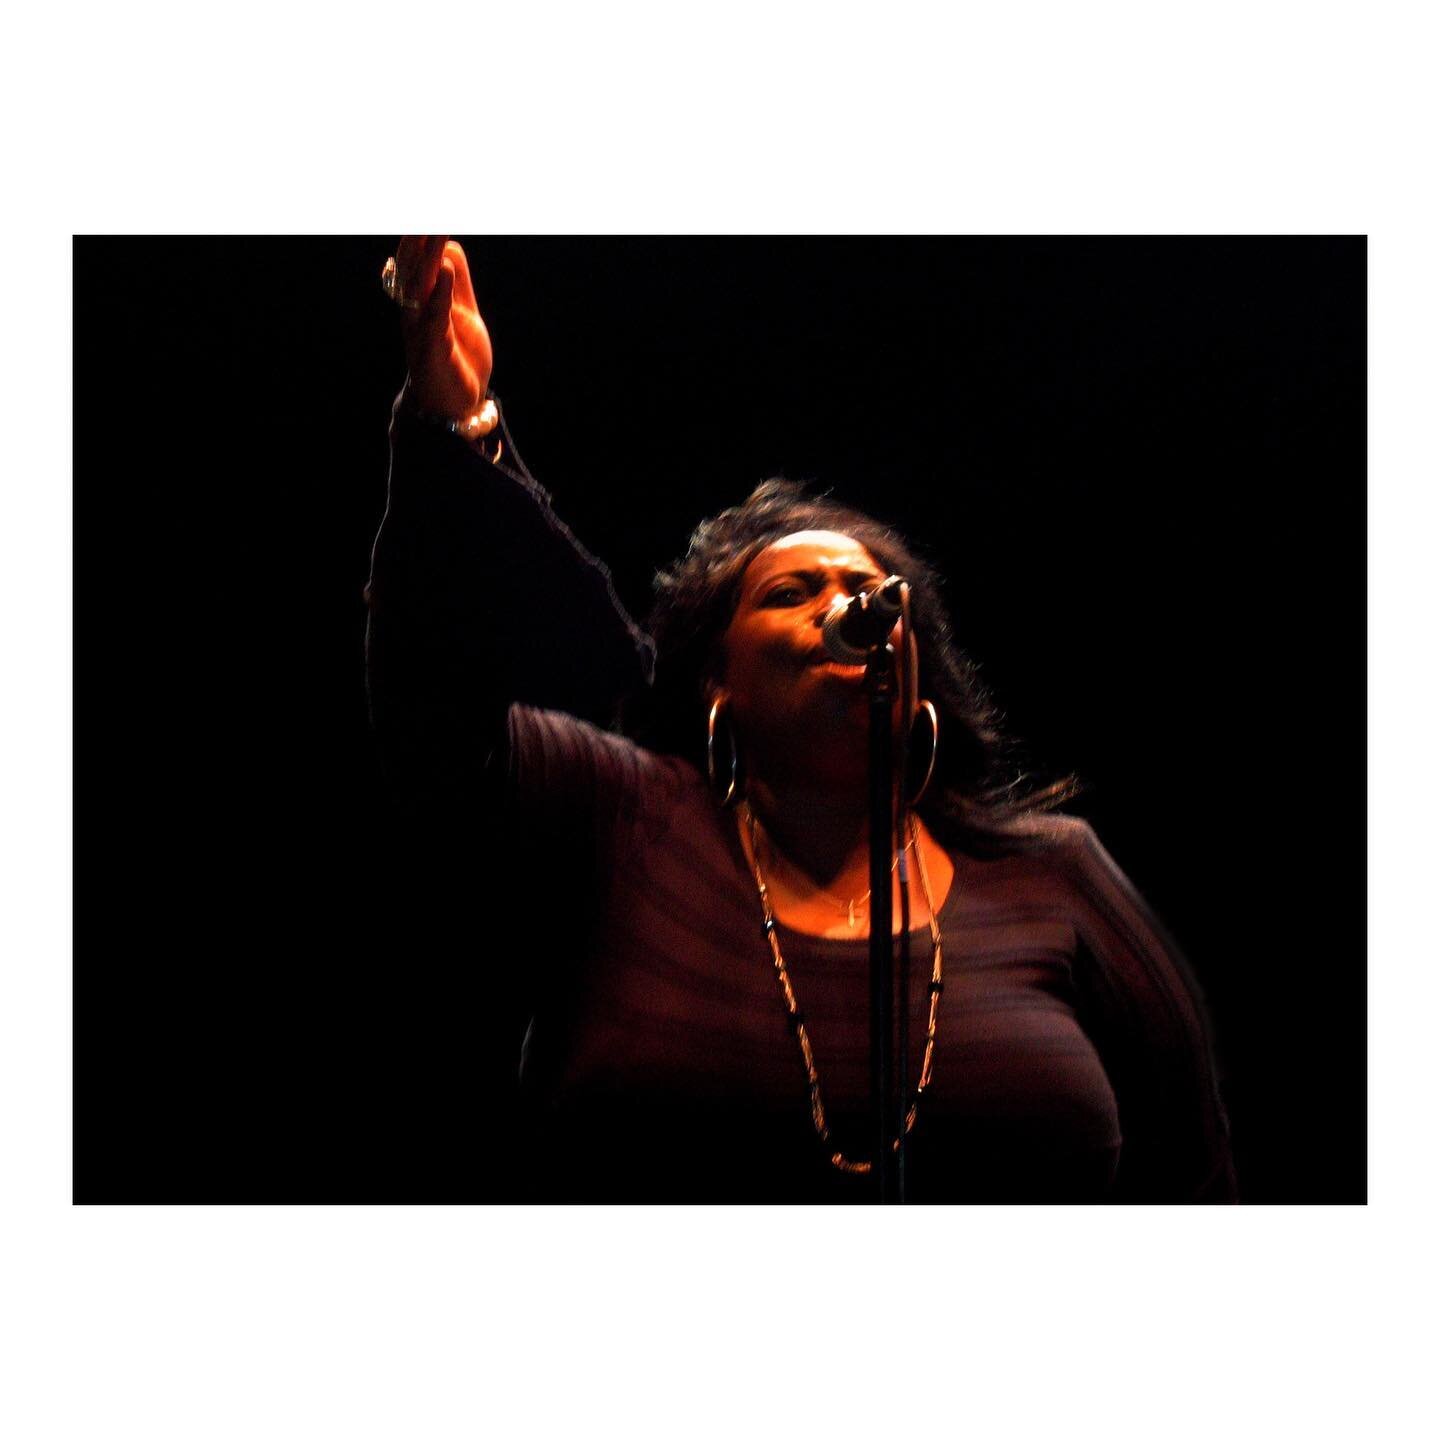 &ldquo;Reflections about love sit nicely in this vibe.&rdquo; .- #RubyTurner 
♫
The first time I got introduced to the voice of Ruby Turner is when I saw her performing live at the Jazz Festival in Dubai 2012. I got captivated by her voice and the al